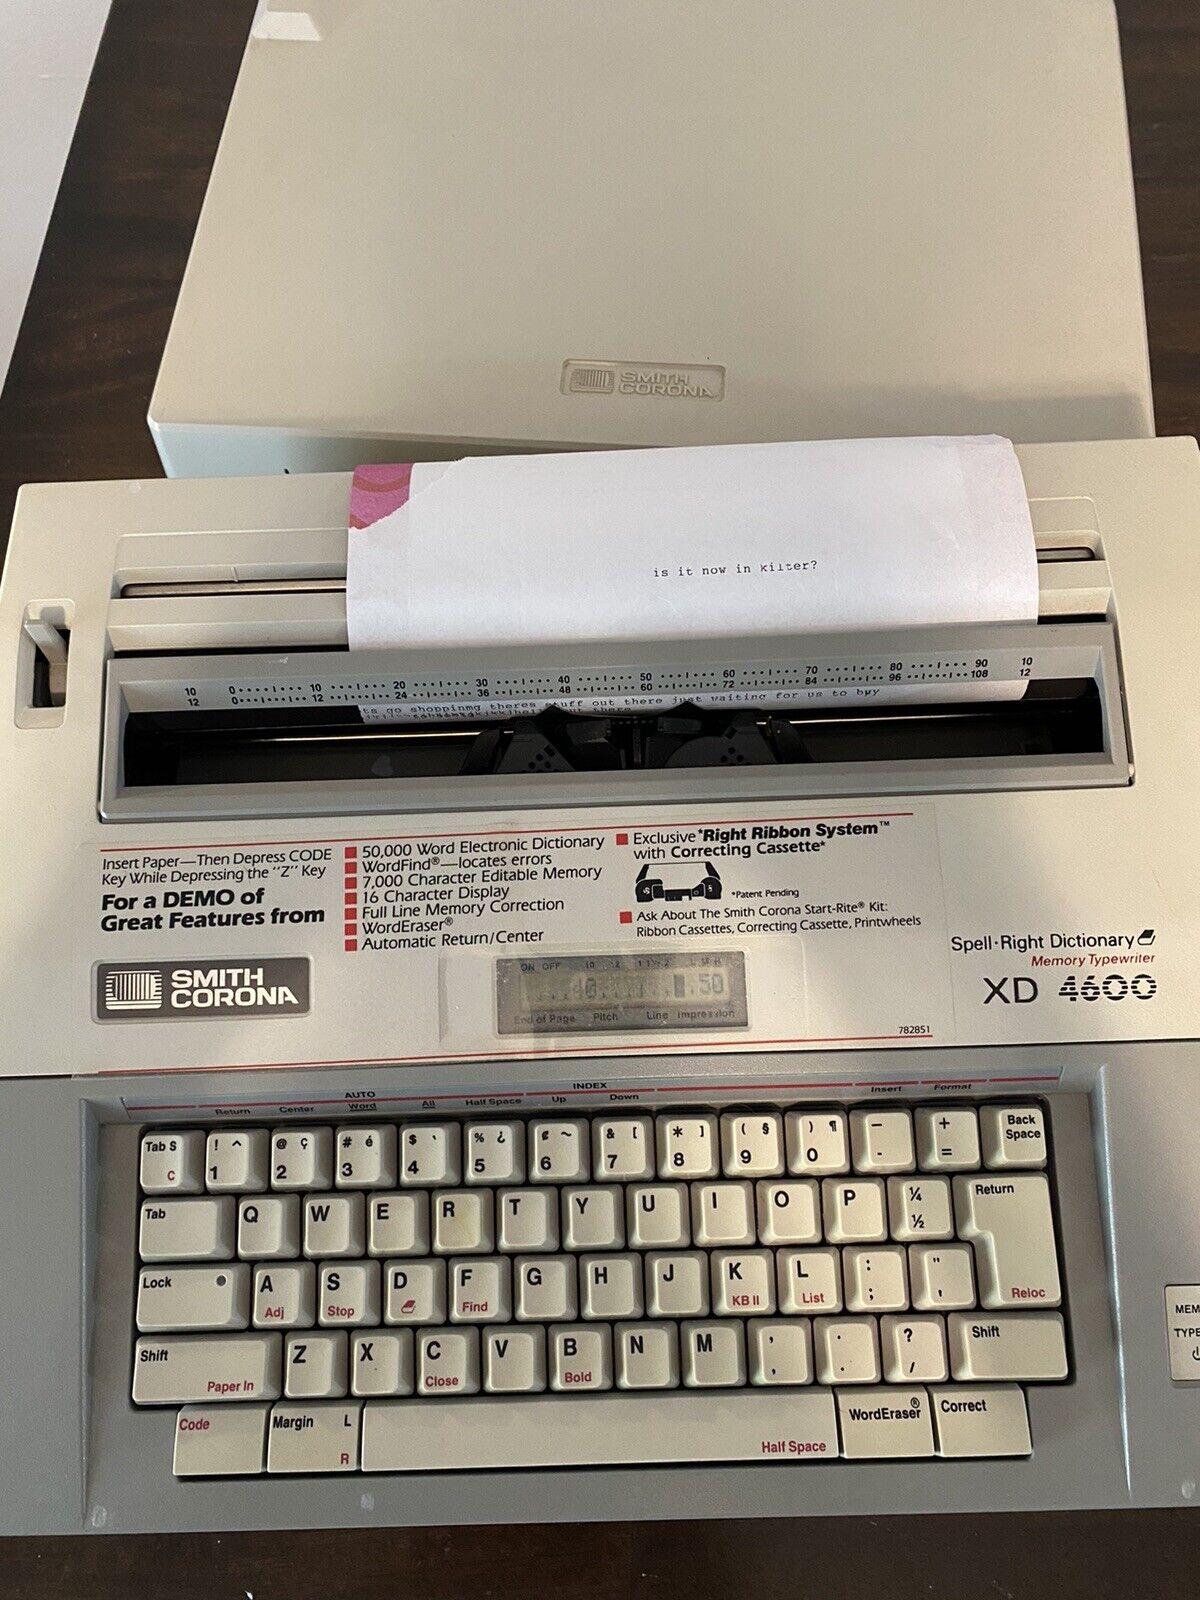 Spell right dictionary memory typewriter XD 4200